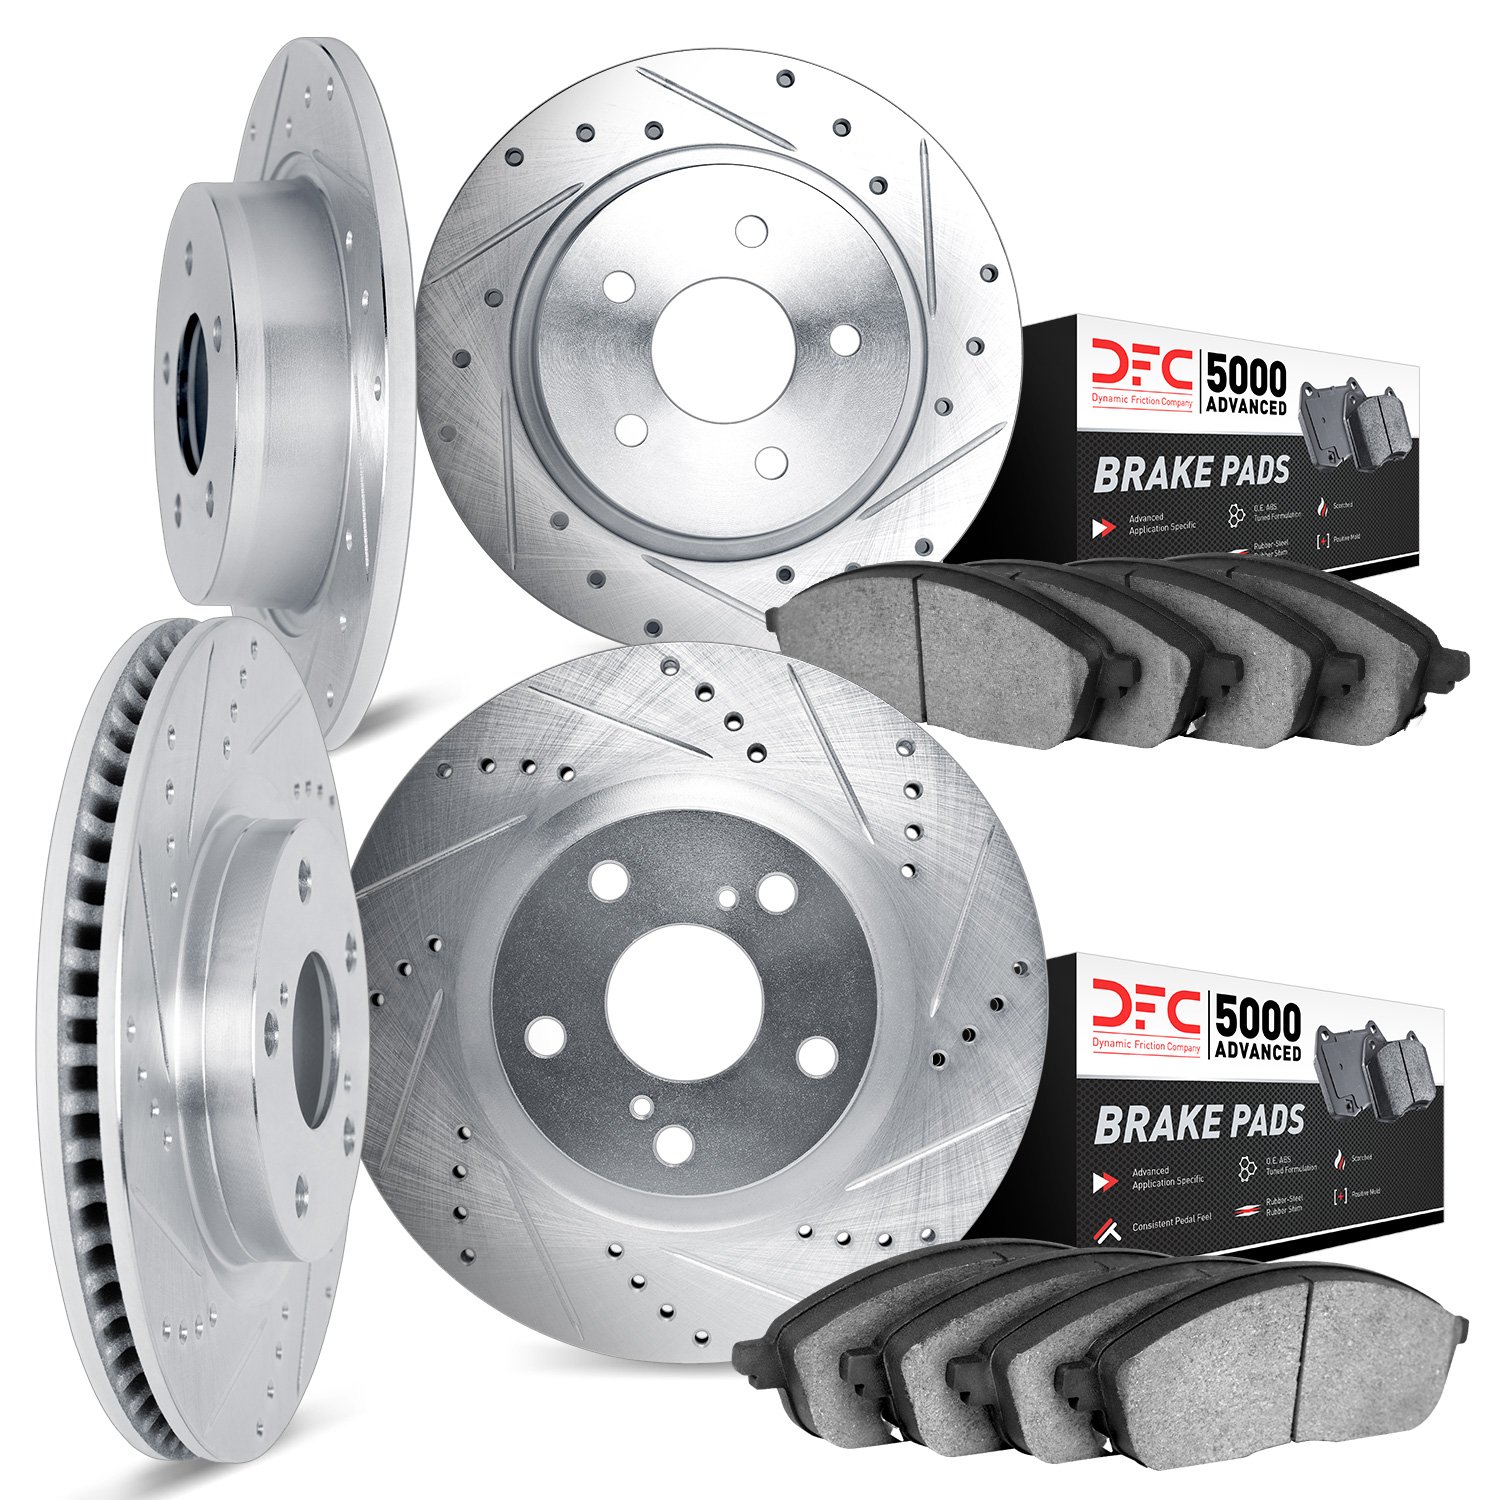 7504-67089 Drilled/Slotted Brake Rotors w/5000 Advanced Brake Pads Kit [Silver], 1994-1999 Infiniti/Nissan, Position: Front and